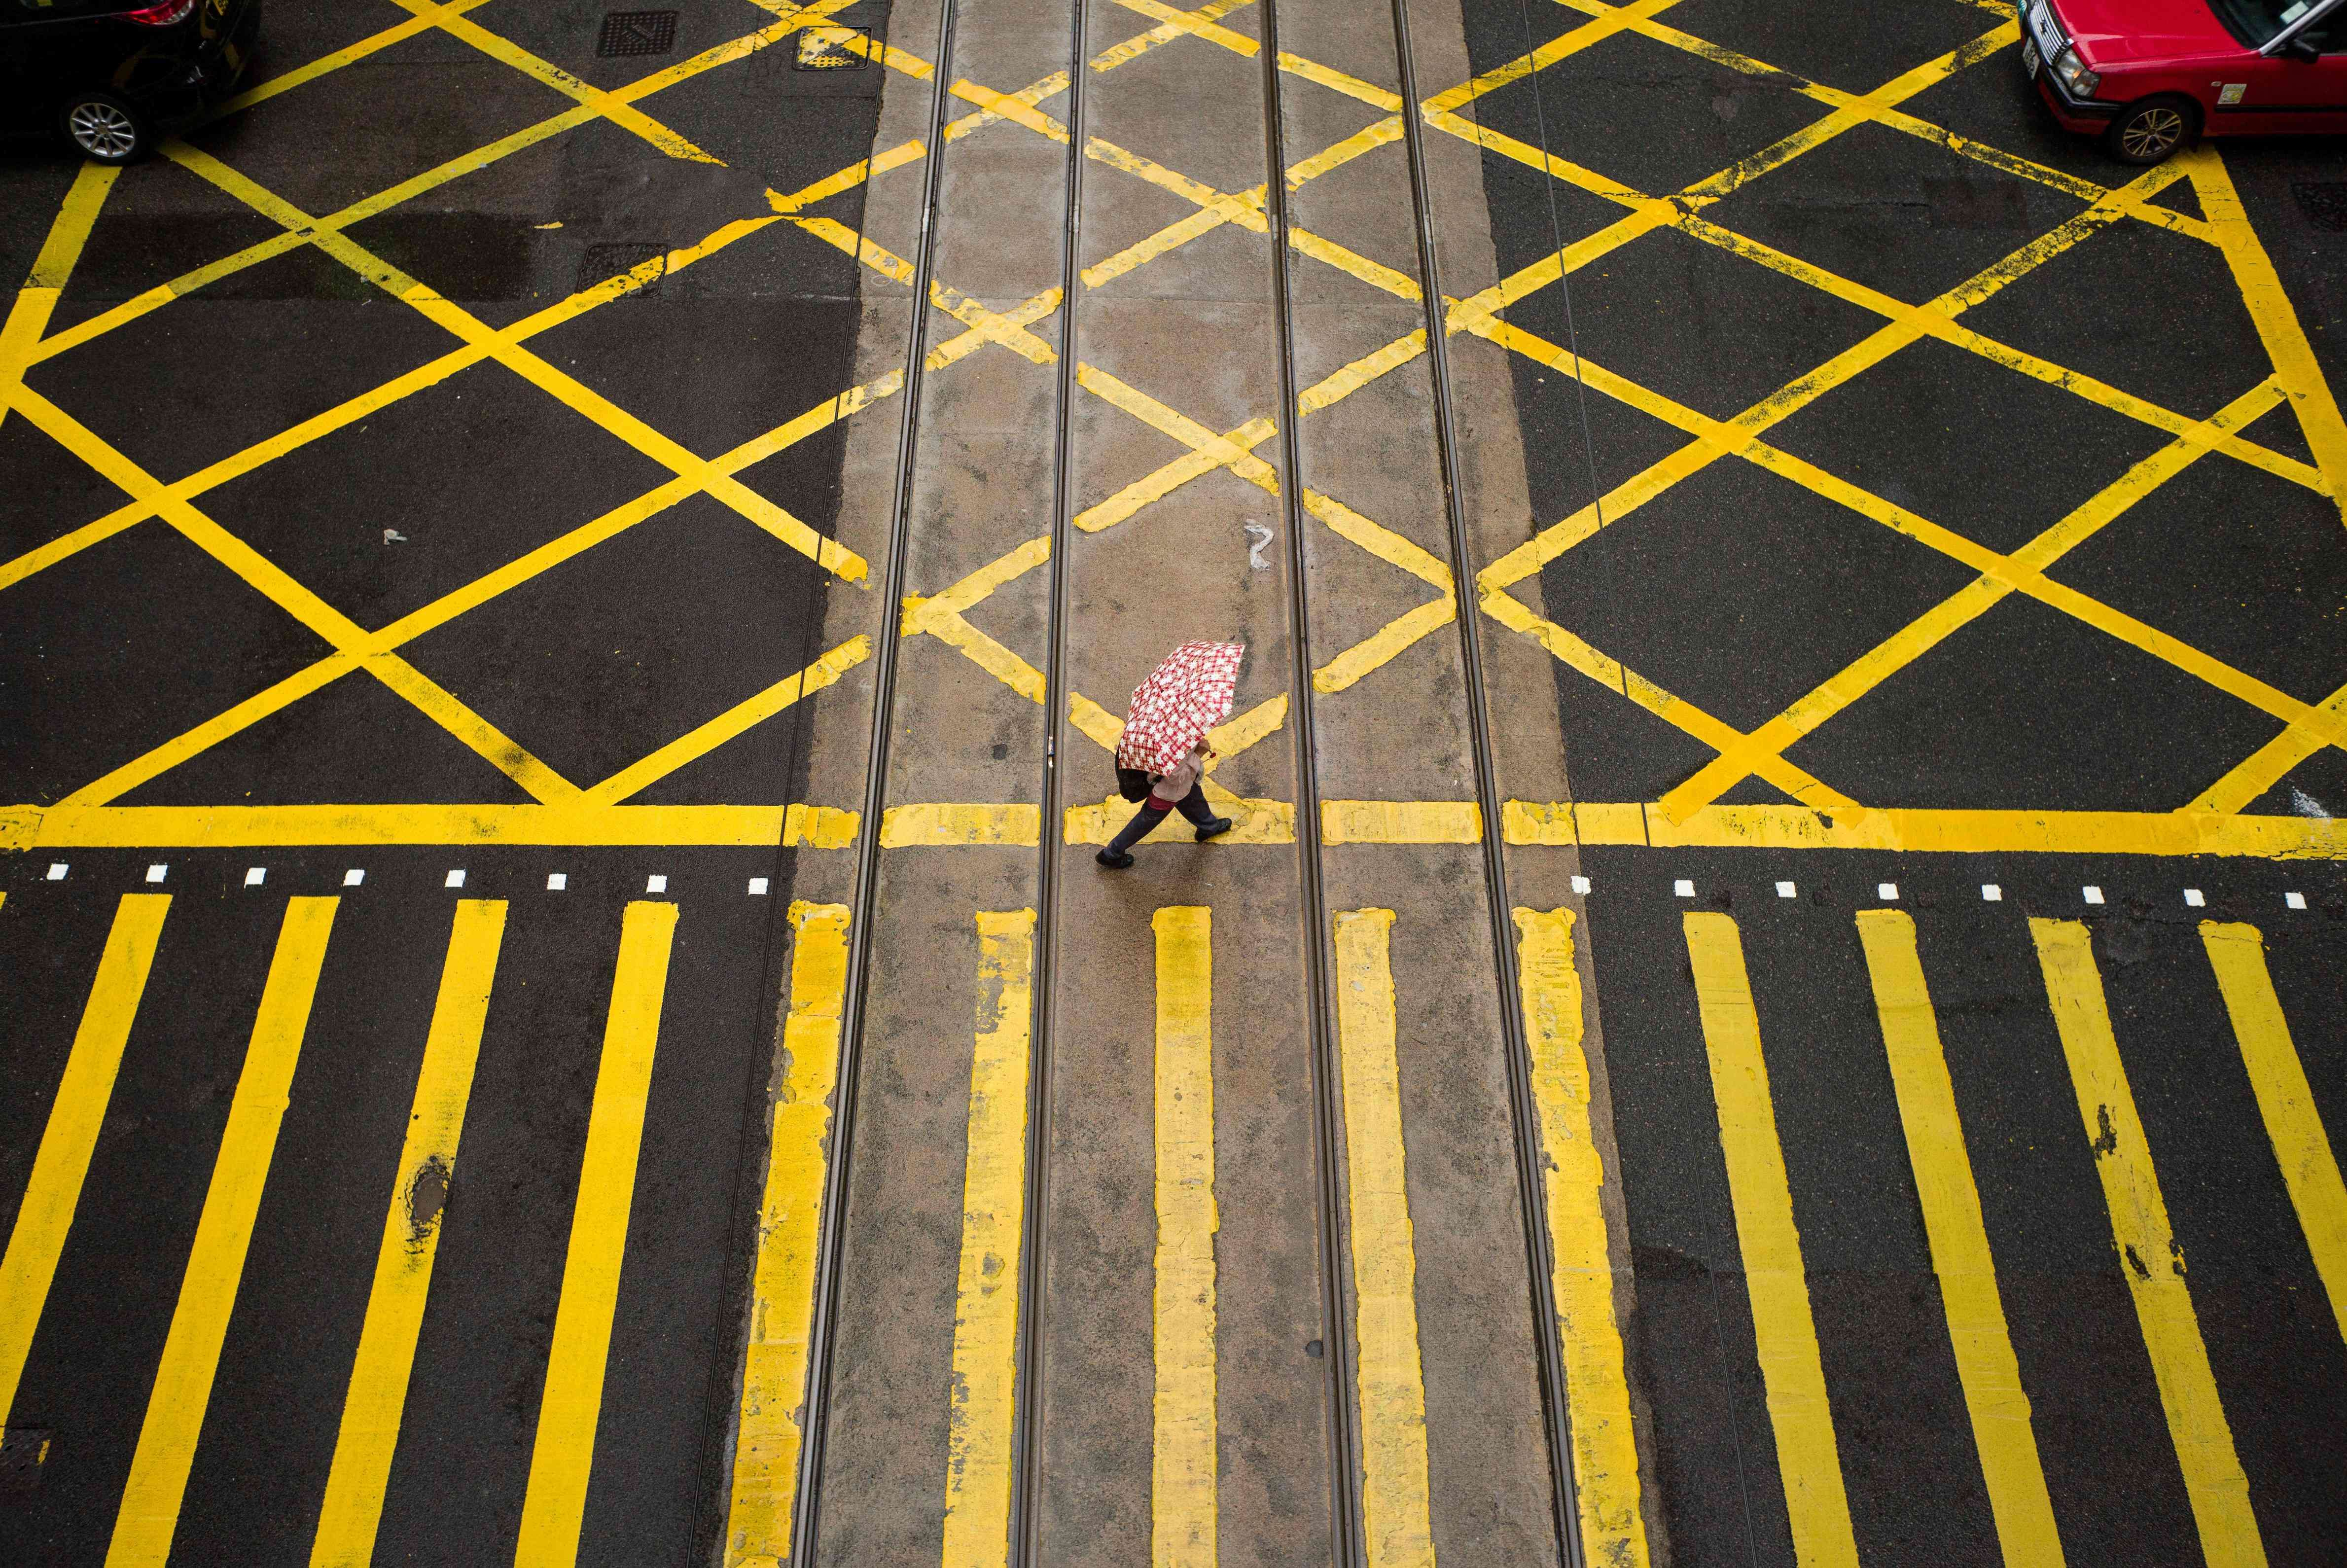 A pedestrian crosses a road in Hong Kong. Hong Kong’s economy is unapologetically capitalist, while the mainland is a socialist state. The assumption that the mainland will eventually become capitalist and converge with our economy is too simplistic. Photo: AFP